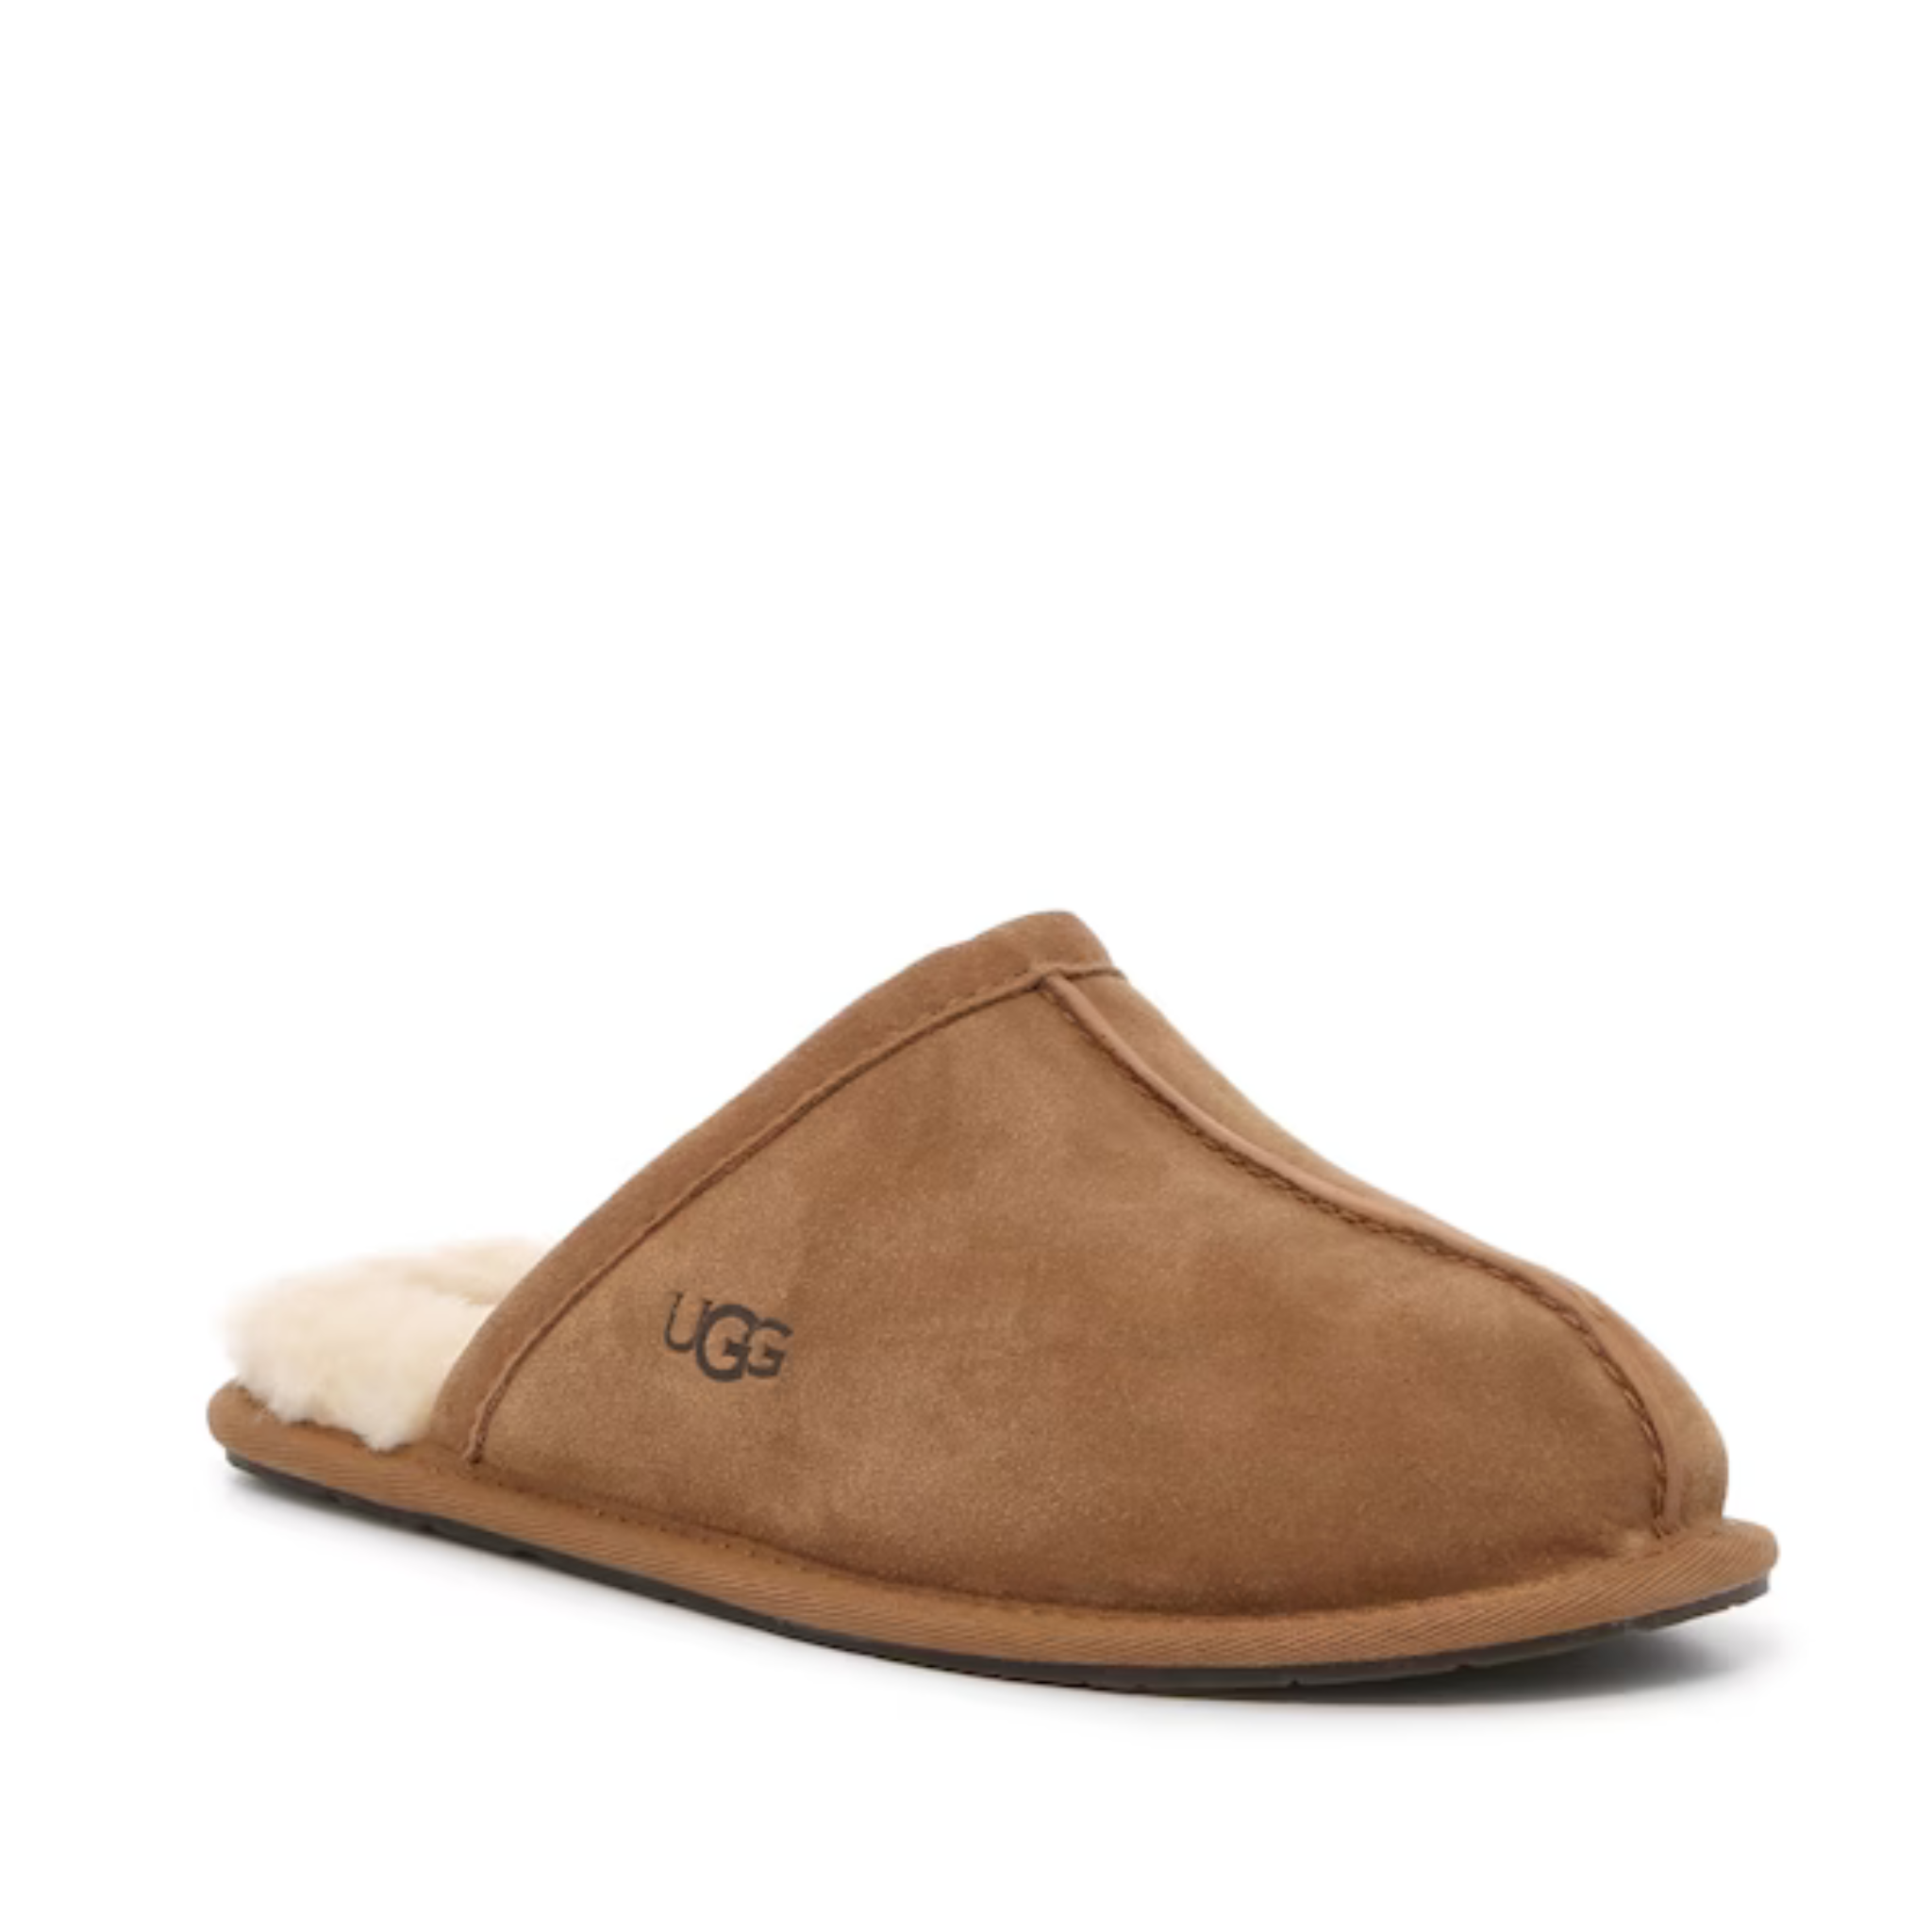 UGG Pearle Slipper (AND MORE!)